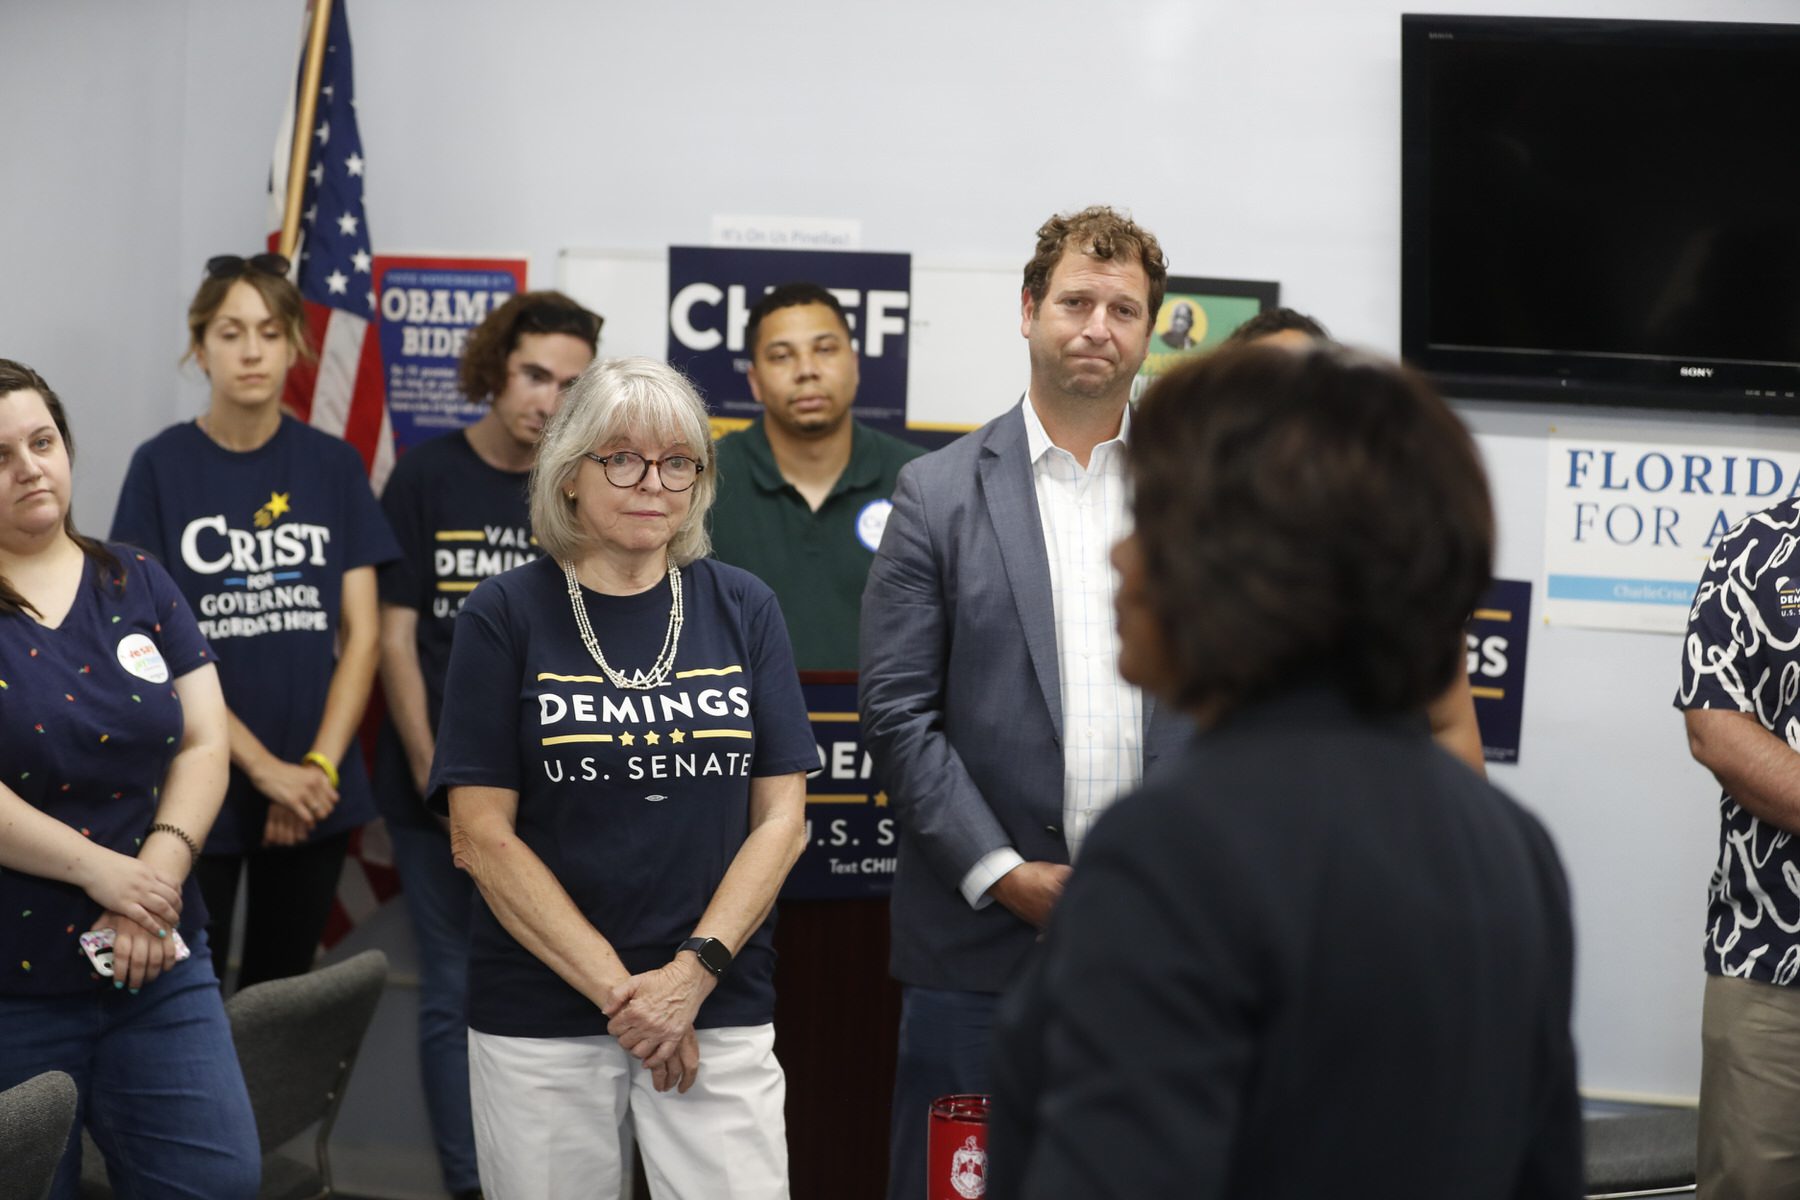 People, some of whom are wearing Val Demings for Senate shirts, listen to the candidate speak